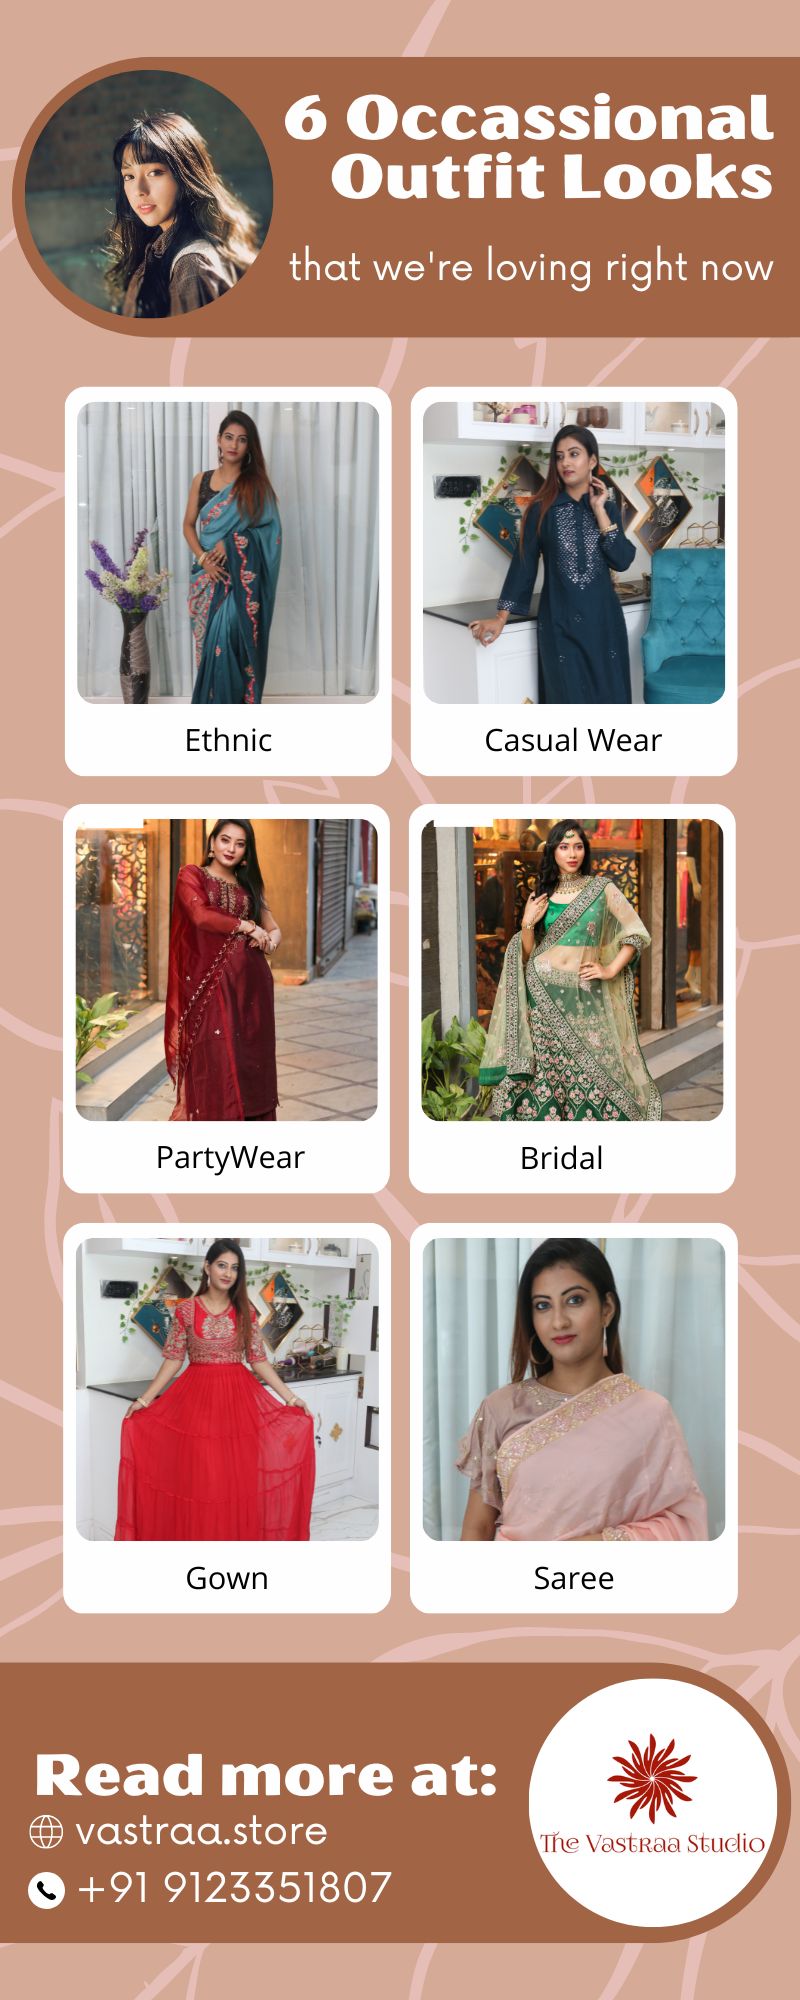 Vastraa Studio by Mahi brings you the best collections for every occasion.